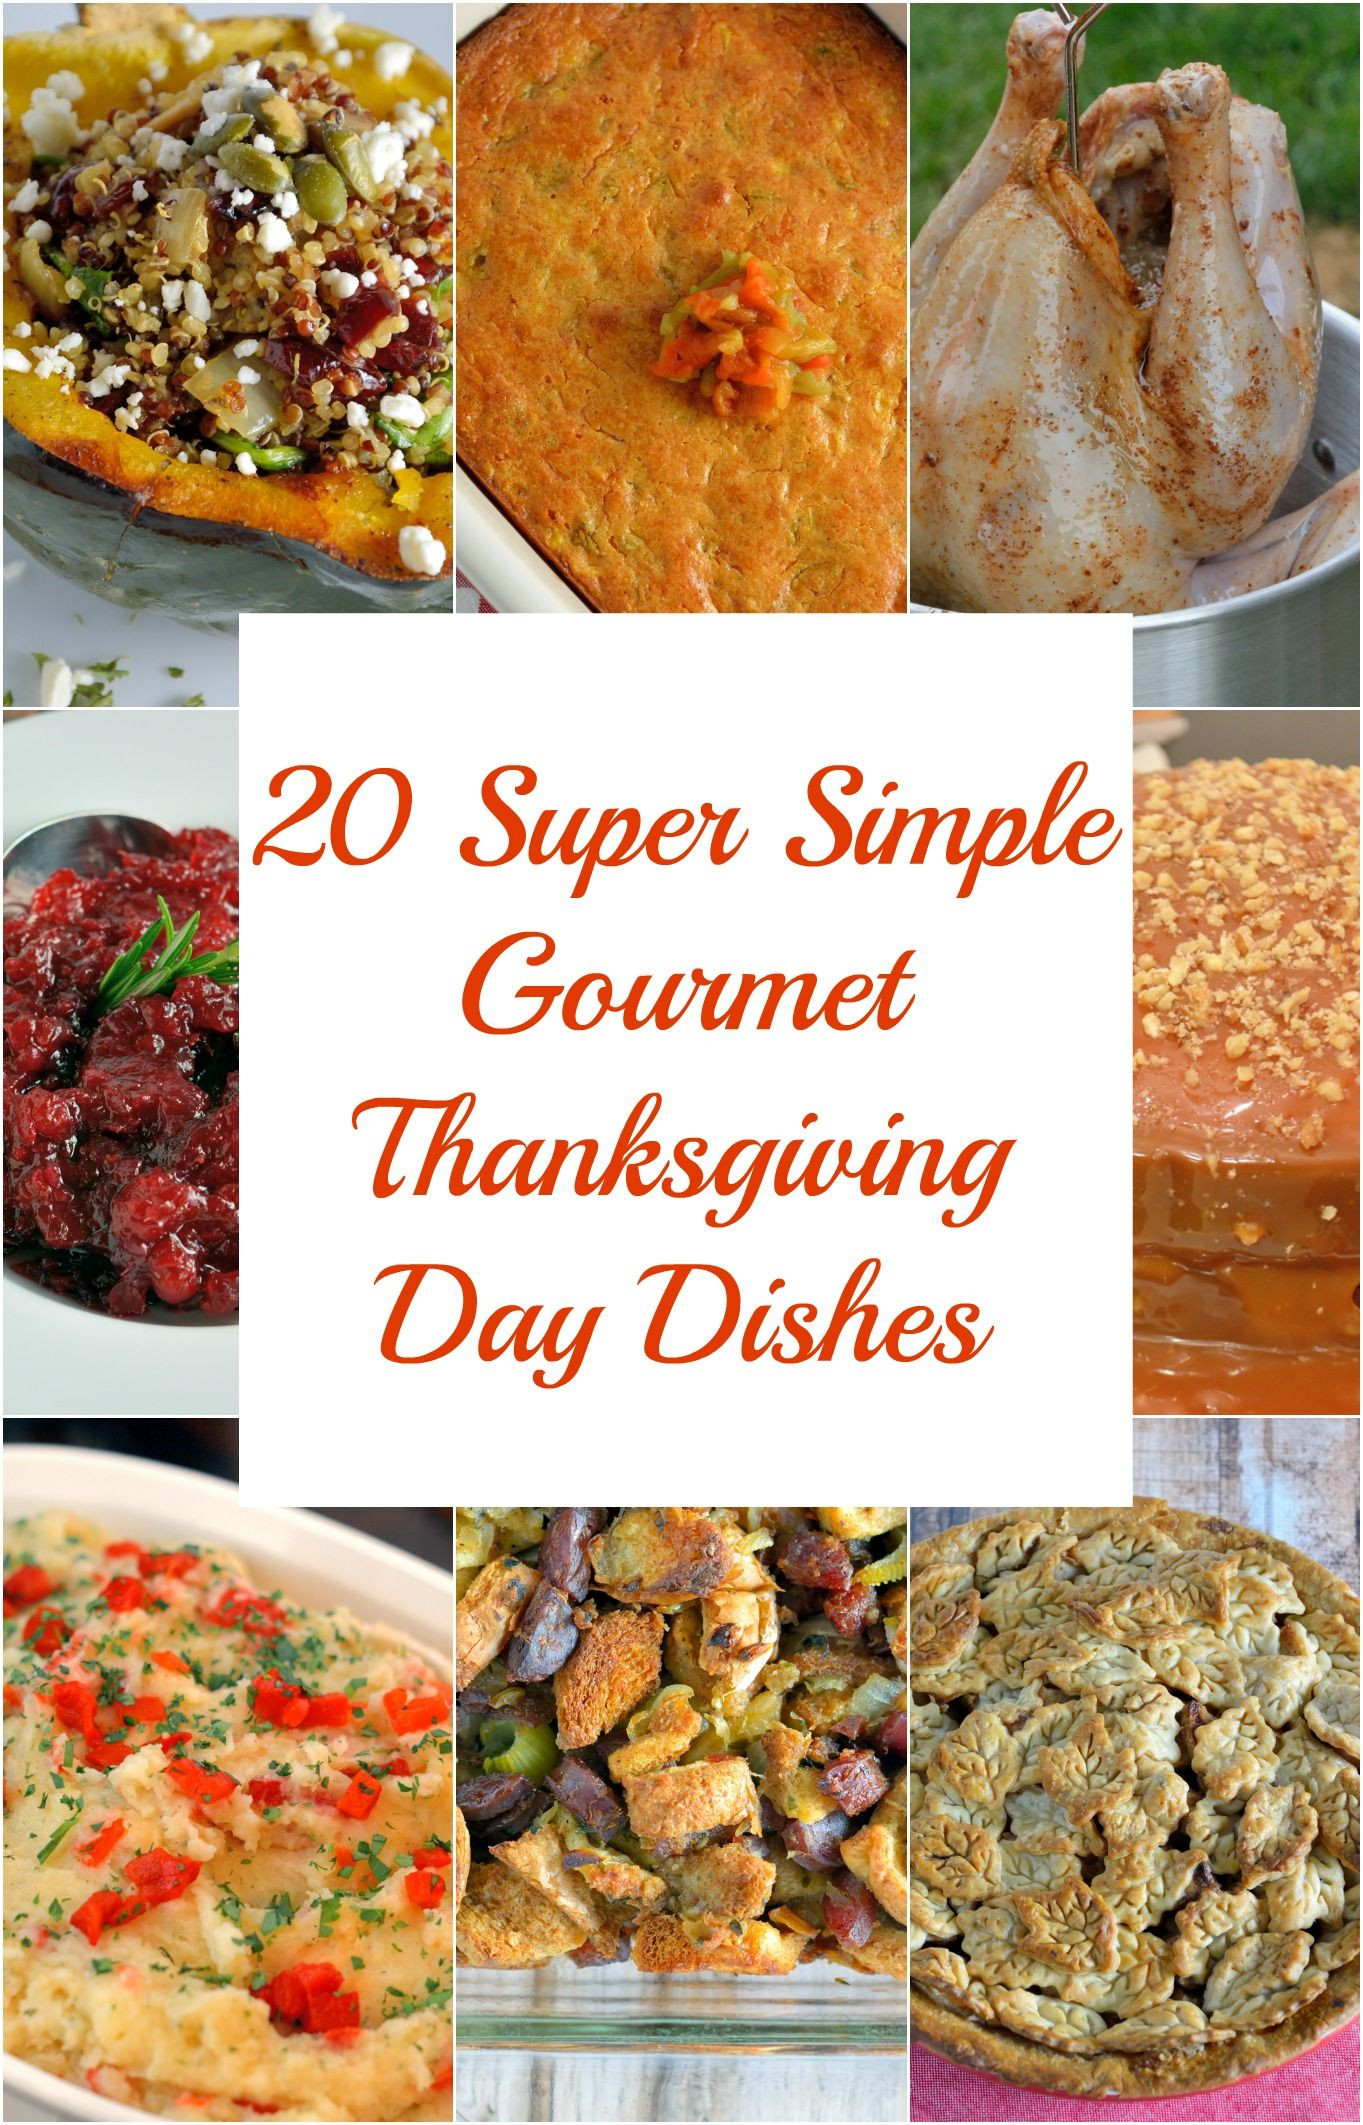 Gourmet Thanksgiving Side Dishes
 20 Super Simple Gourmet Thanksgiving Dishes